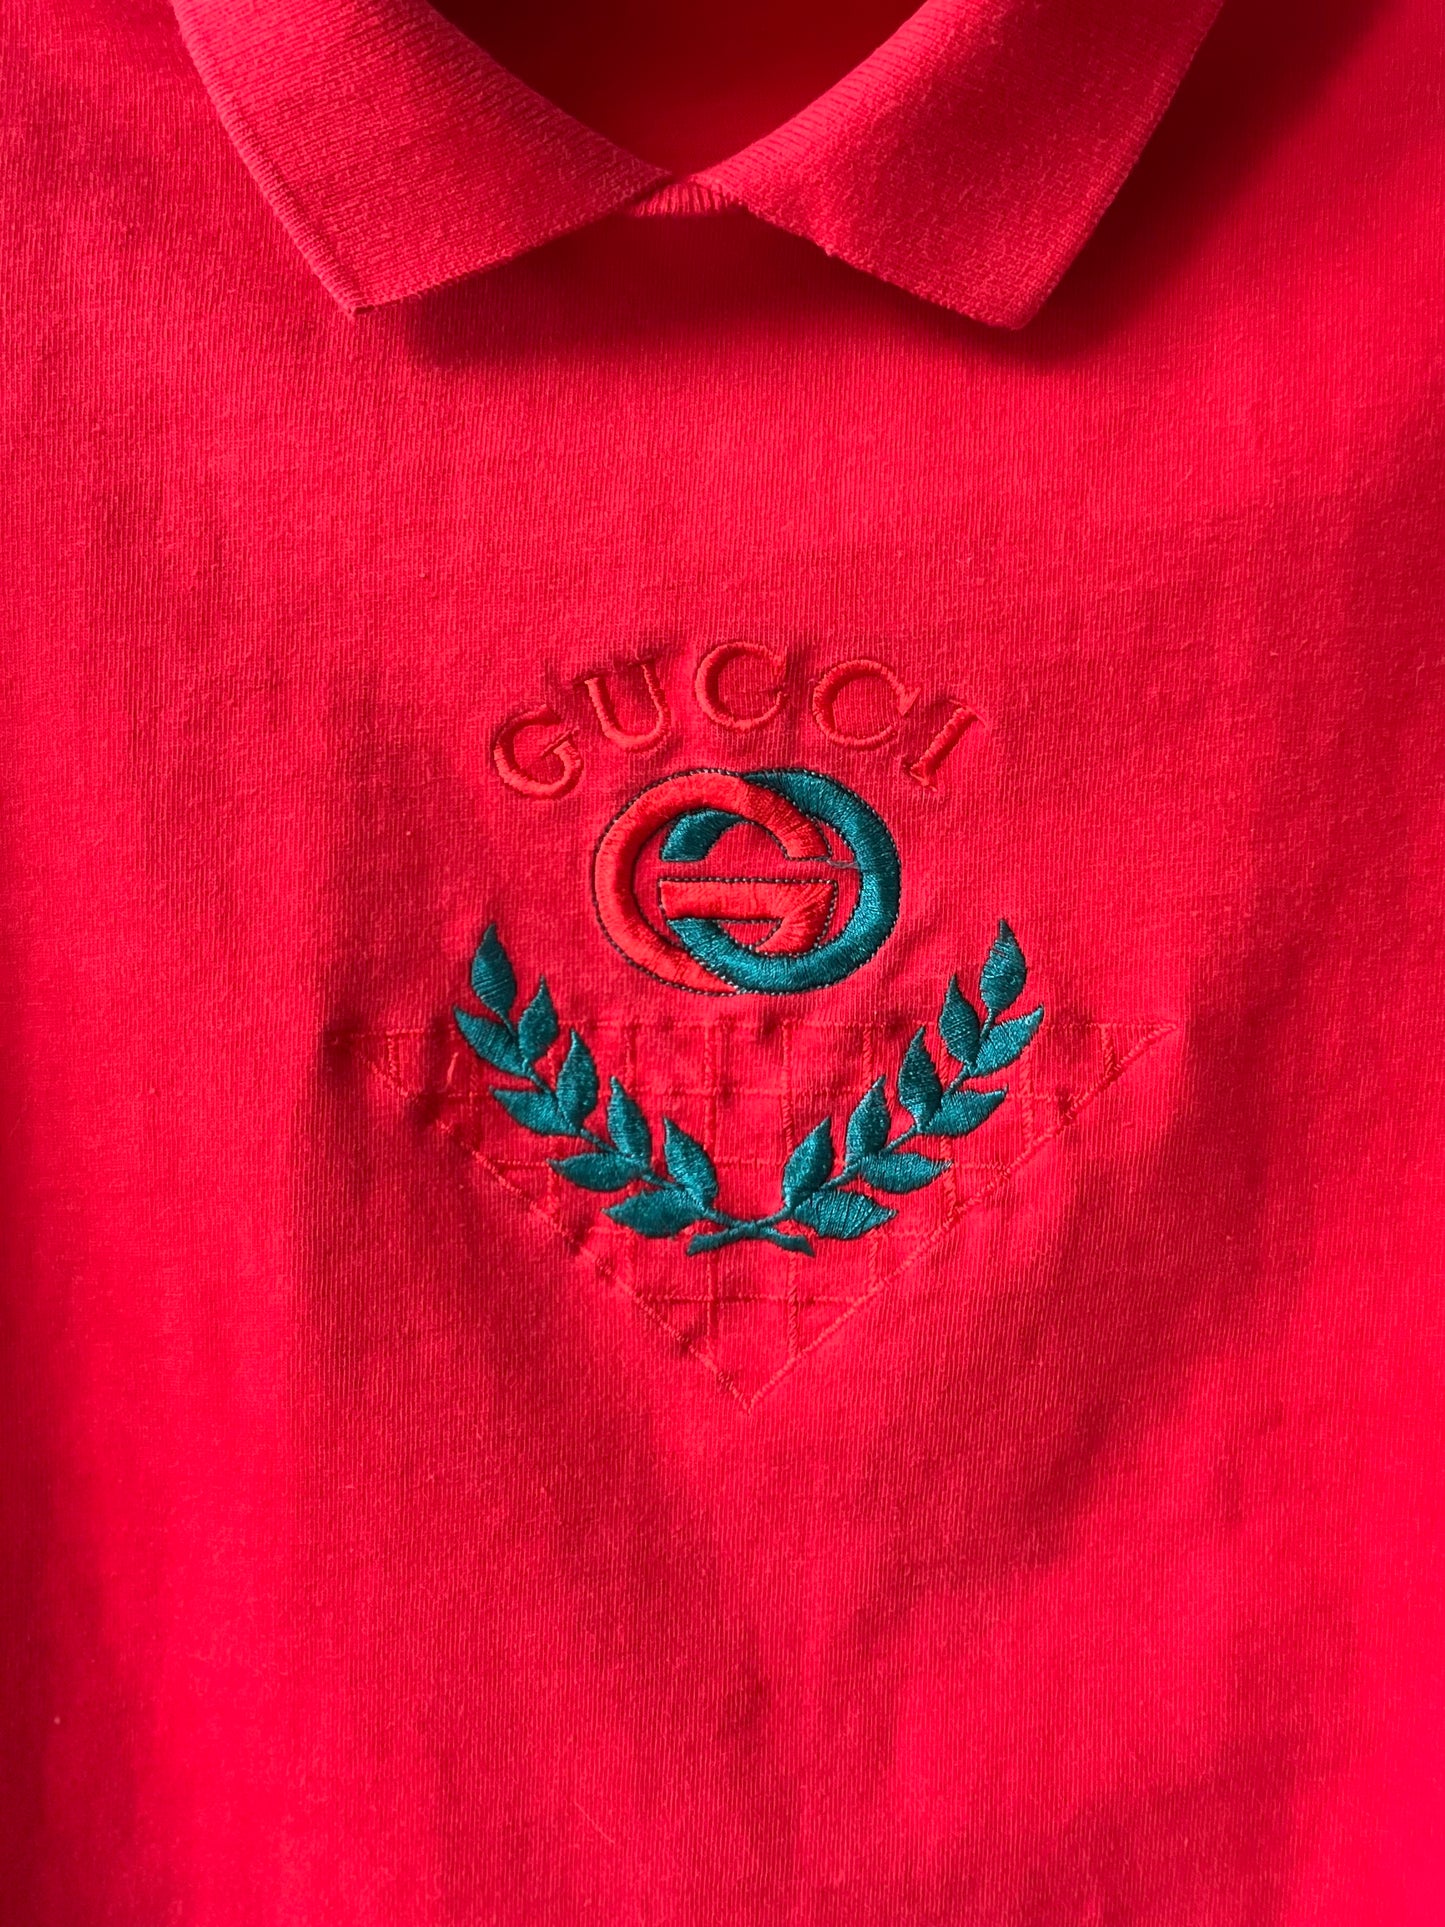 Vintage GUCCI Crested Unisex Polo Shirt - Size S-L